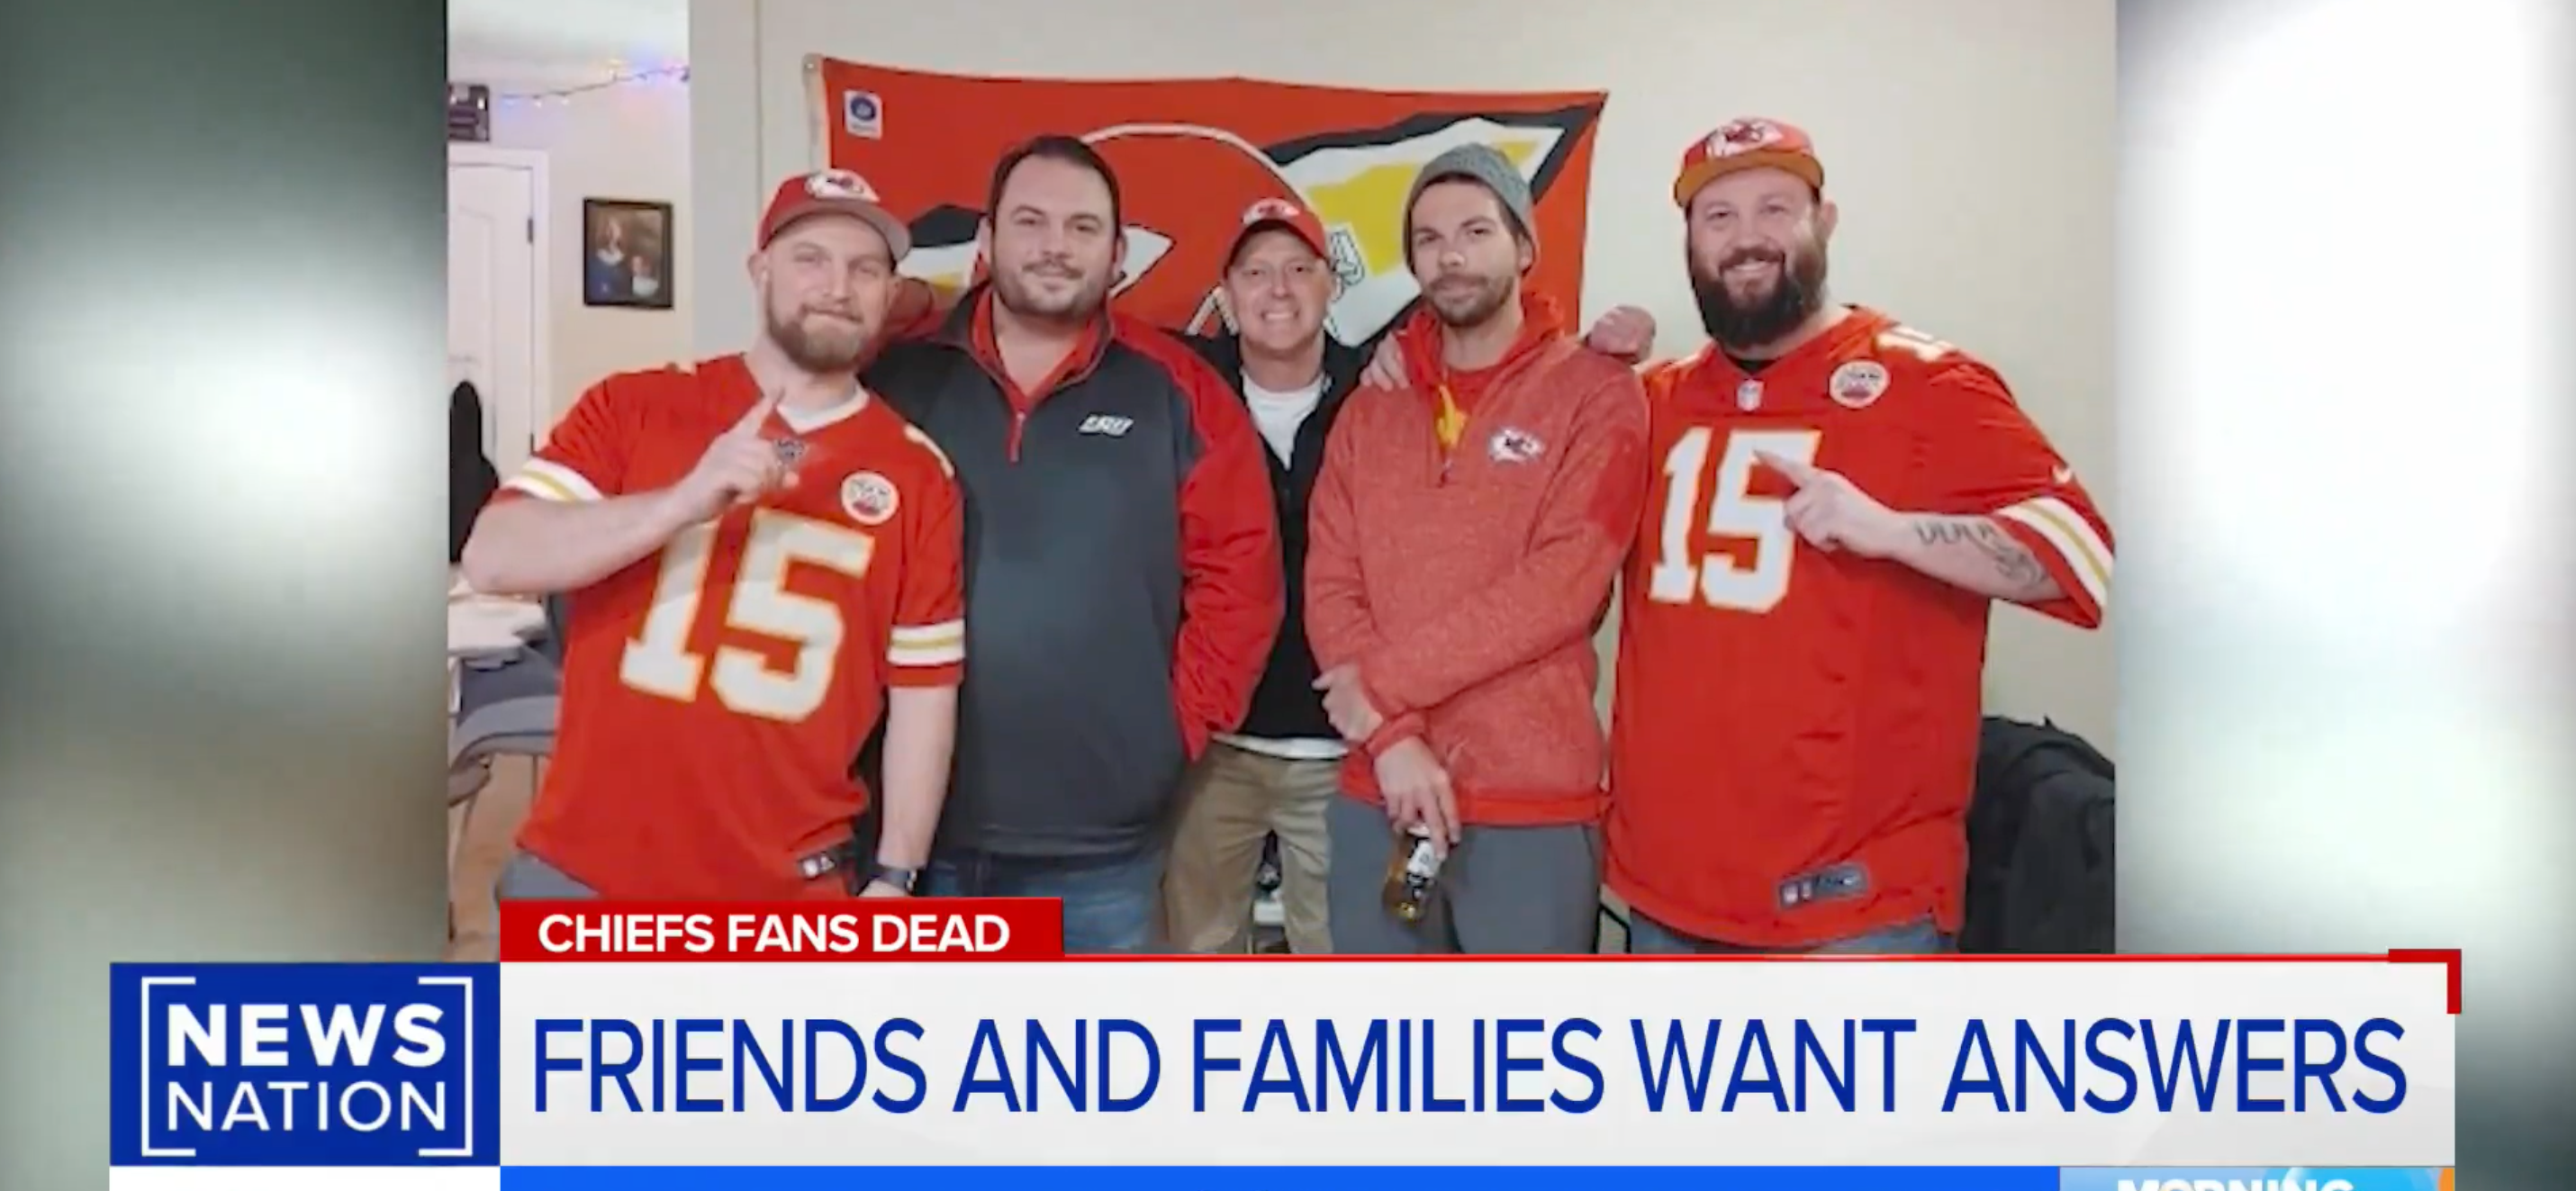 Brother Of Dead Chiefs Fan Claims There Was 'Something' In Their System